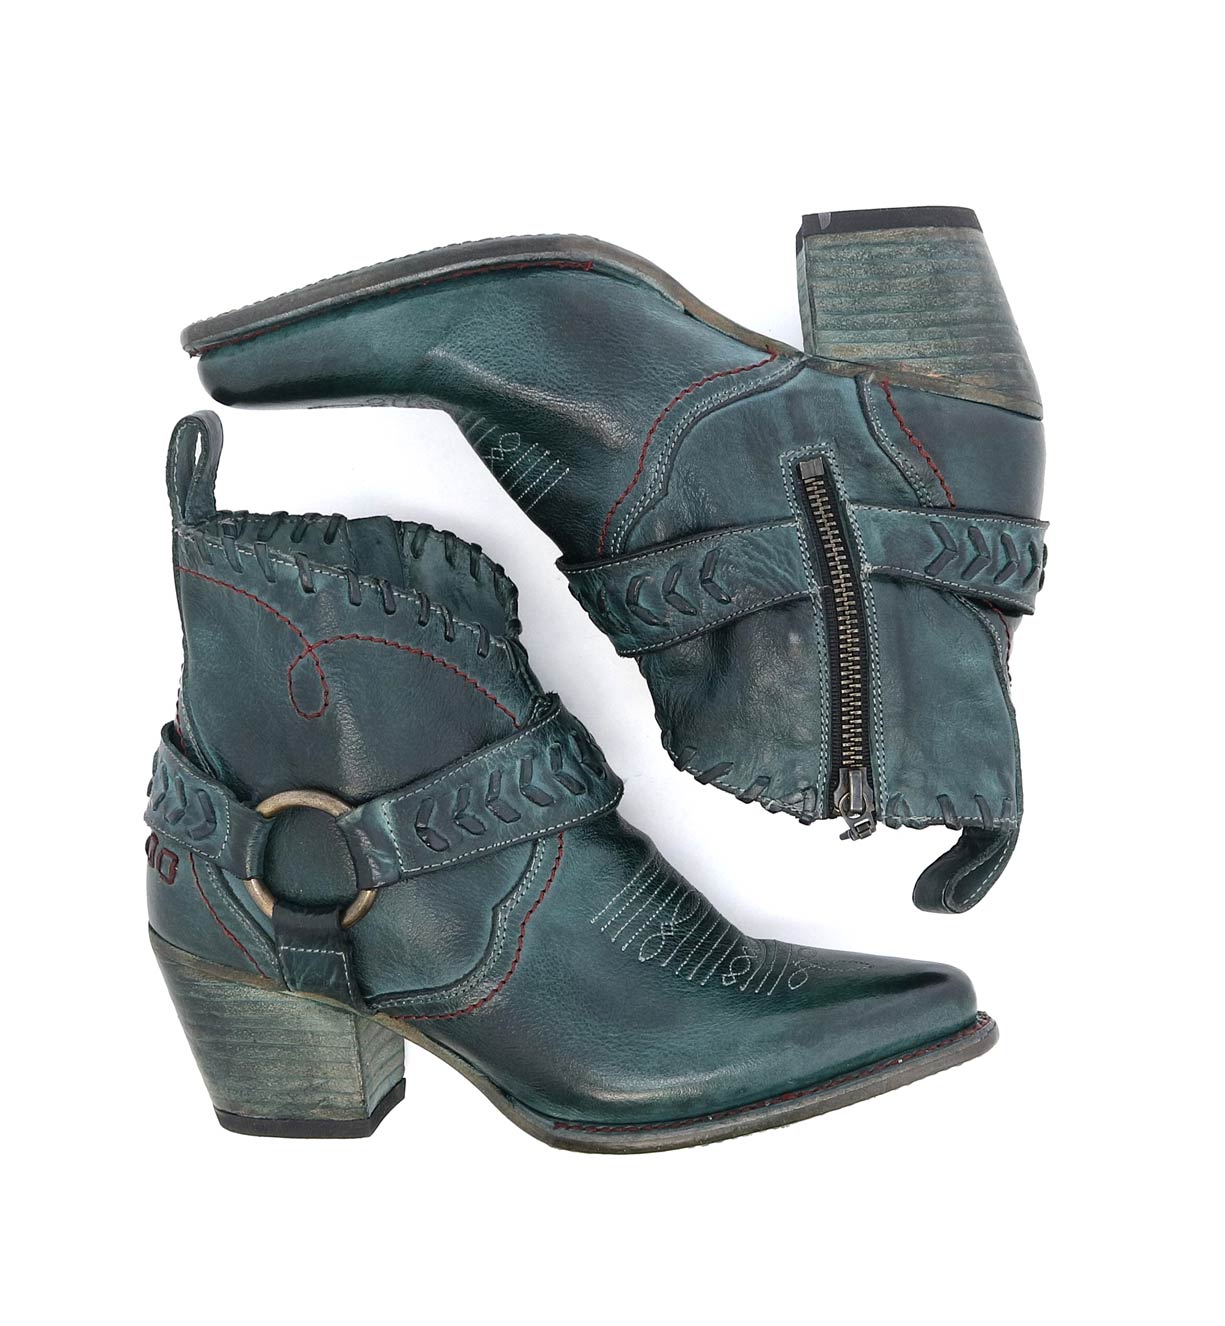 A pair of green Tania cowboy boots with buckles and straps from Bed Stu.